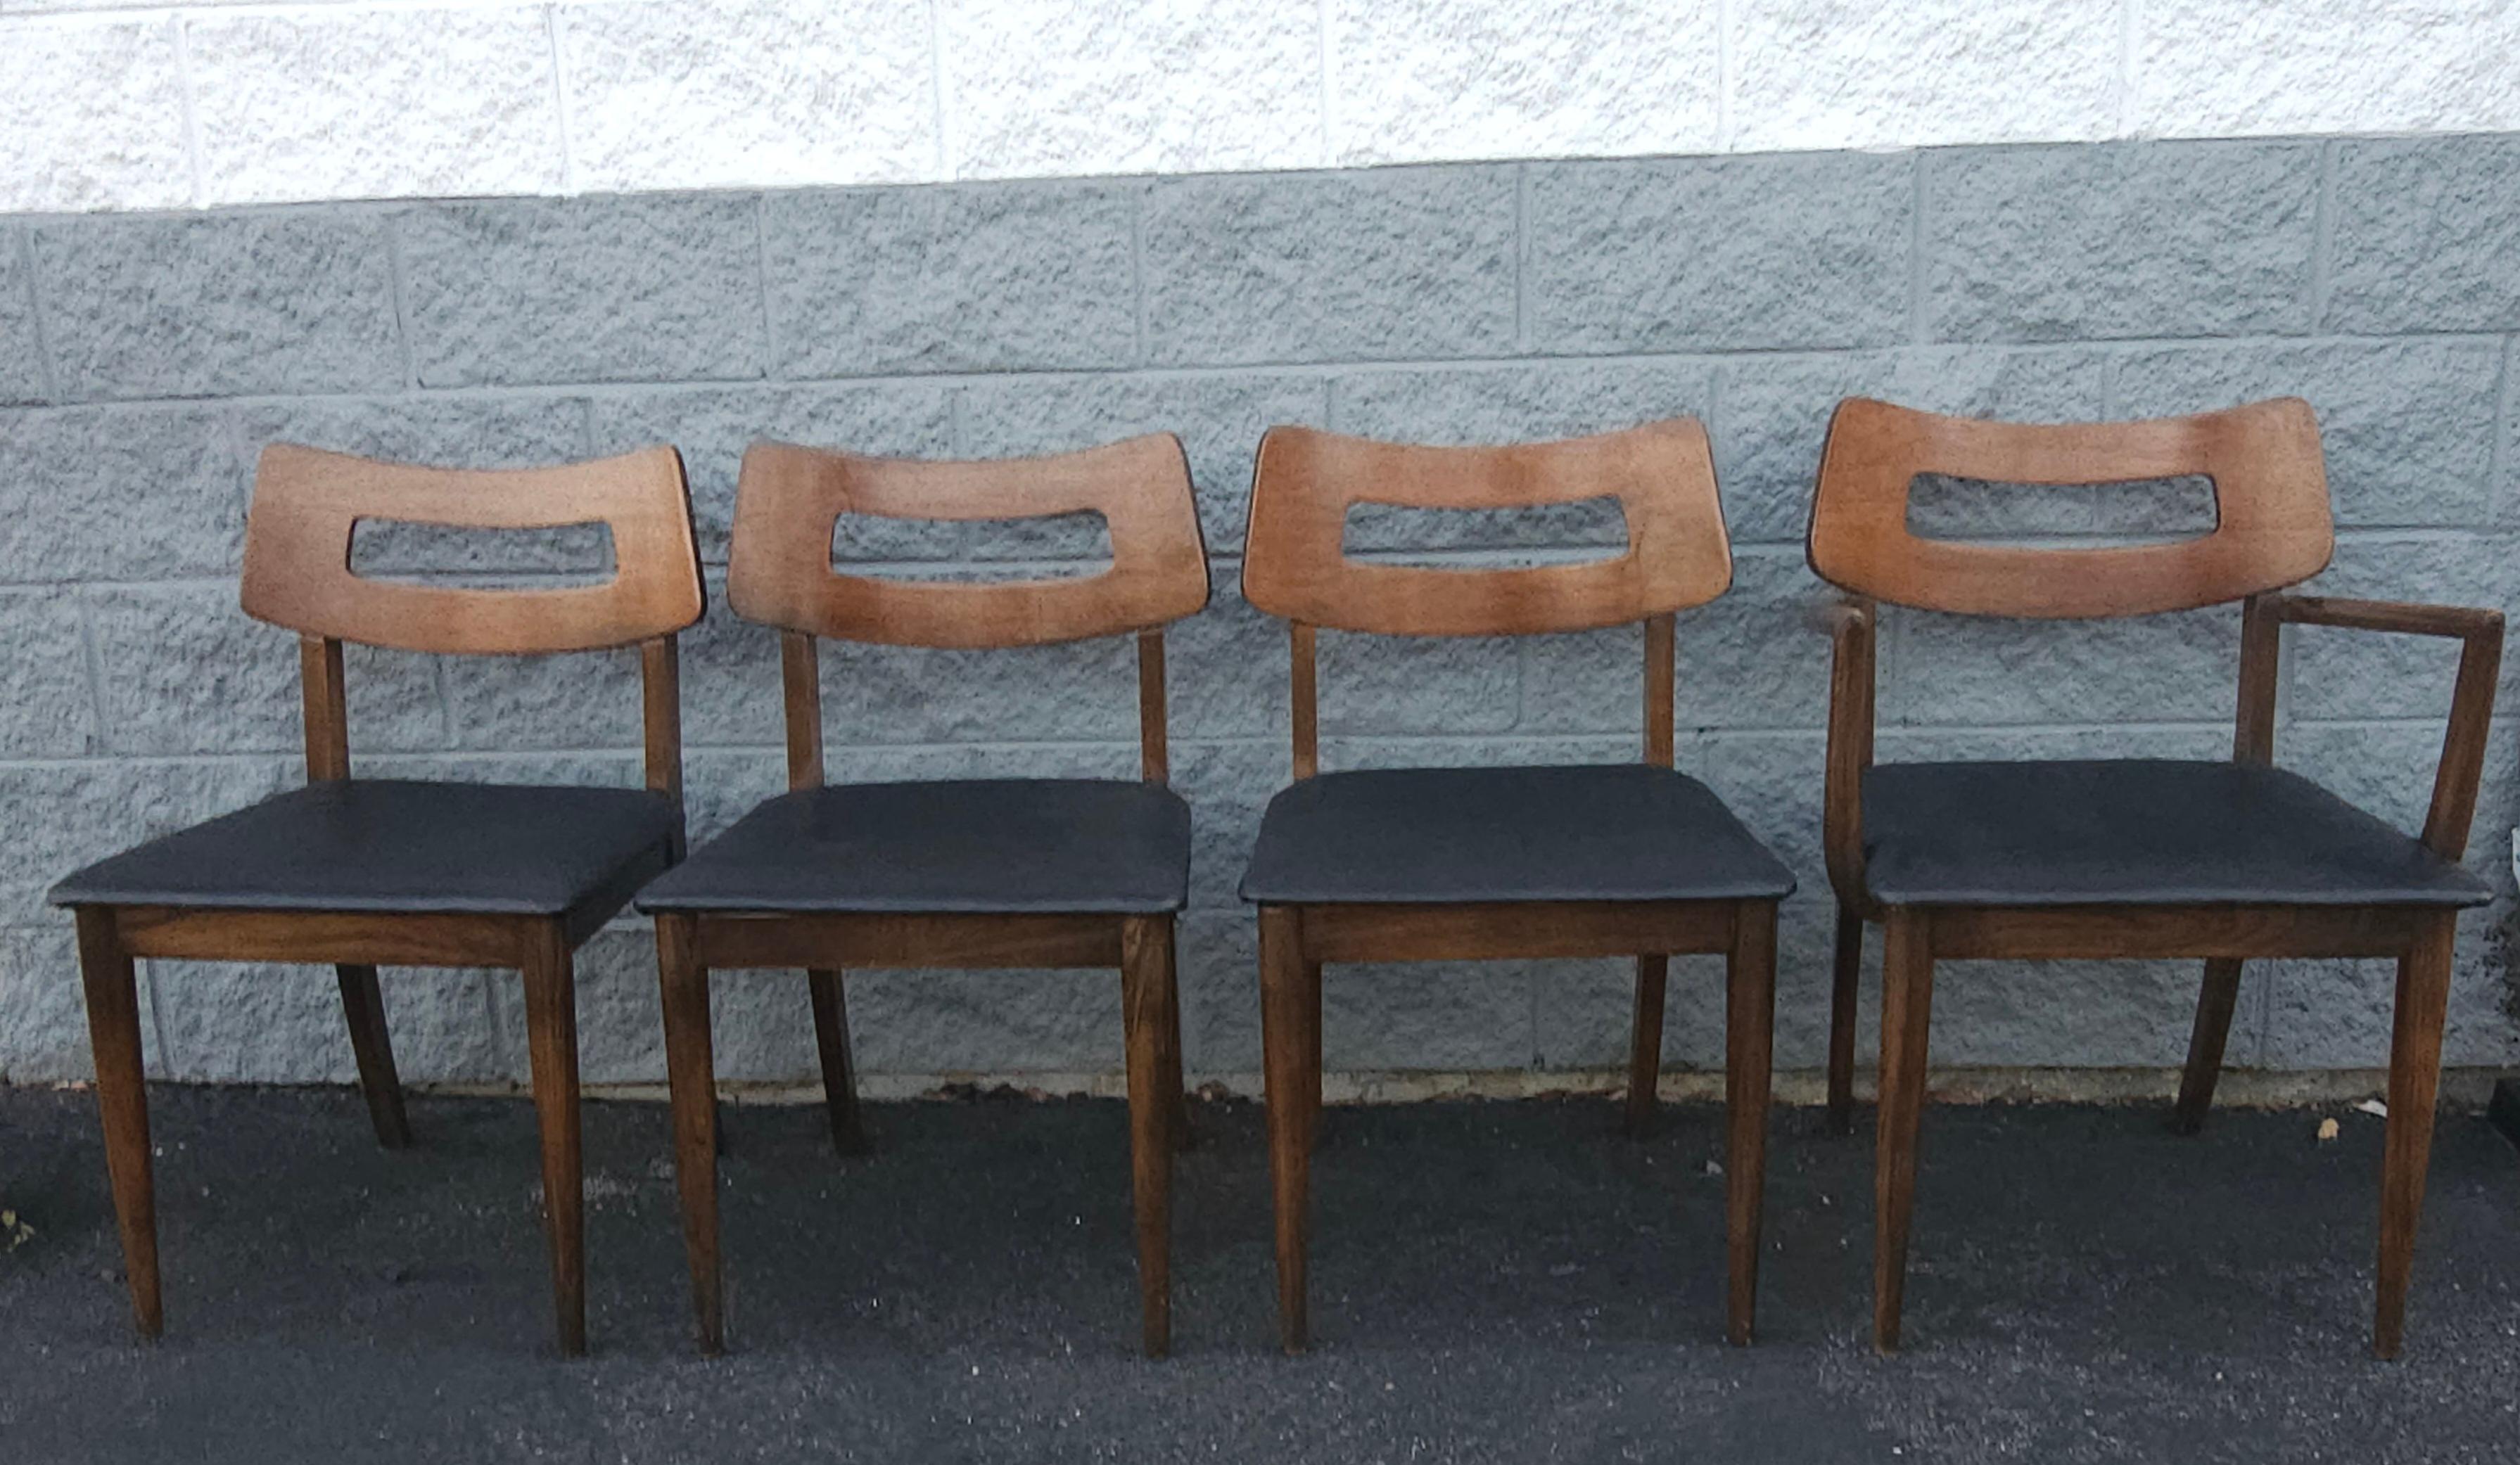 Set of 4 Mid Century Walnut and Vinyl Seat Upholstered Chairs. Very good vintage condition. Solid mid century vinyl seats in great shape. Three side chairs and one arm chair. 

Measures 19